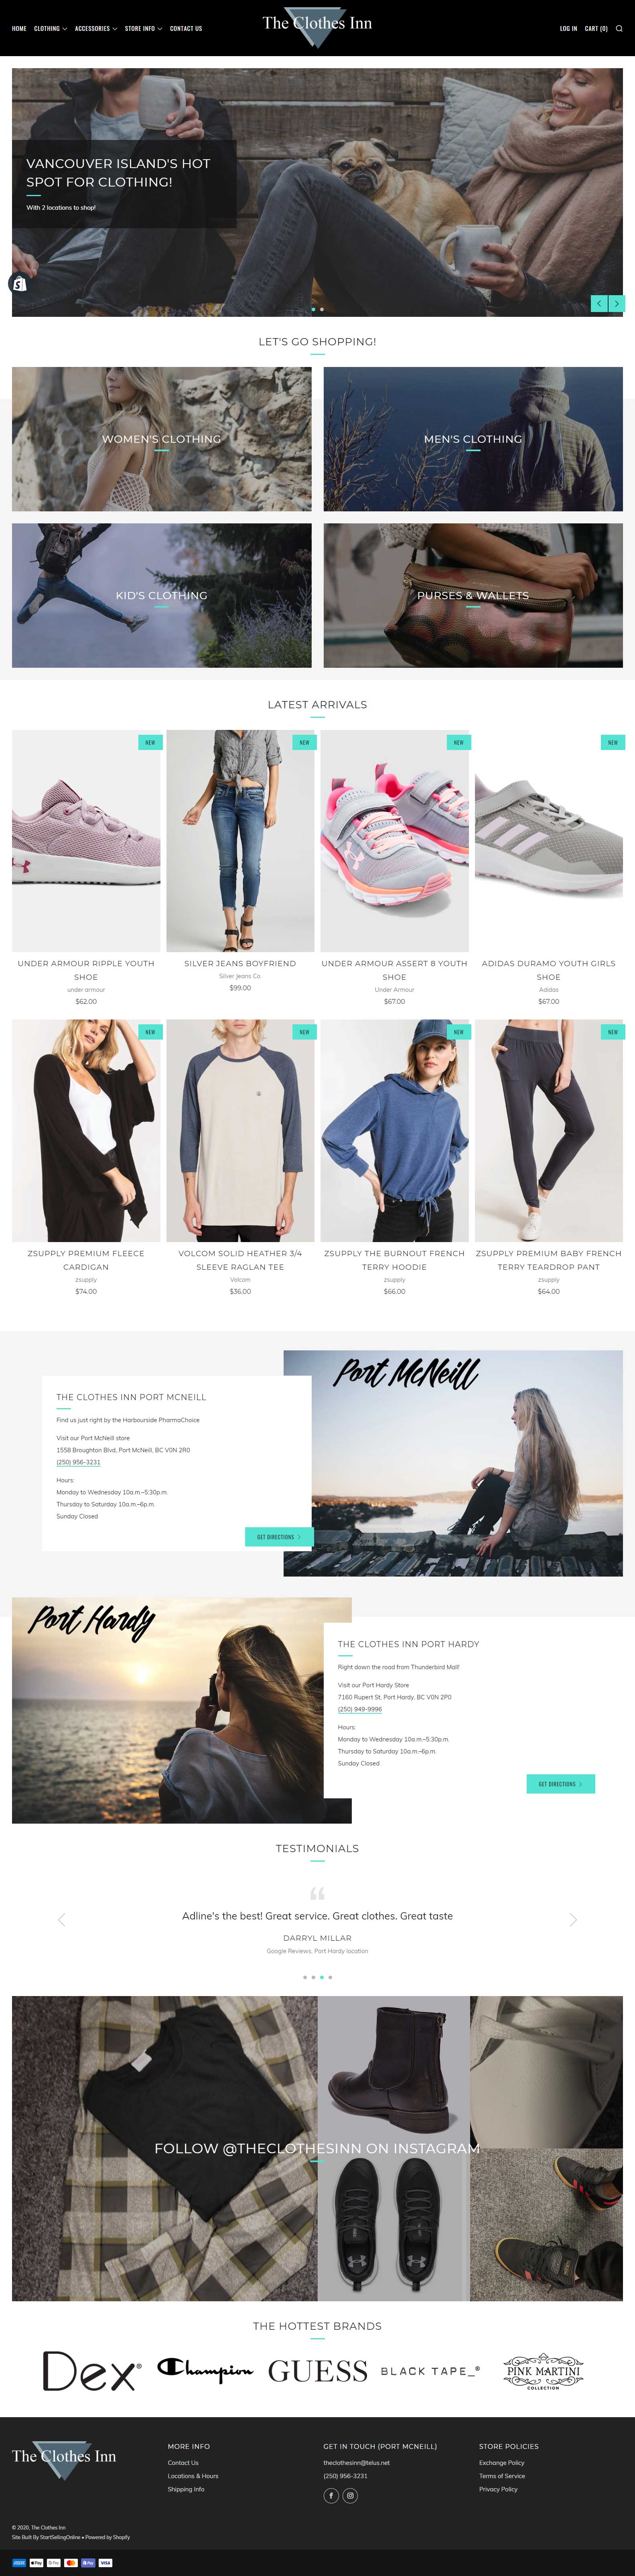 clothes in shopify design vancouver island